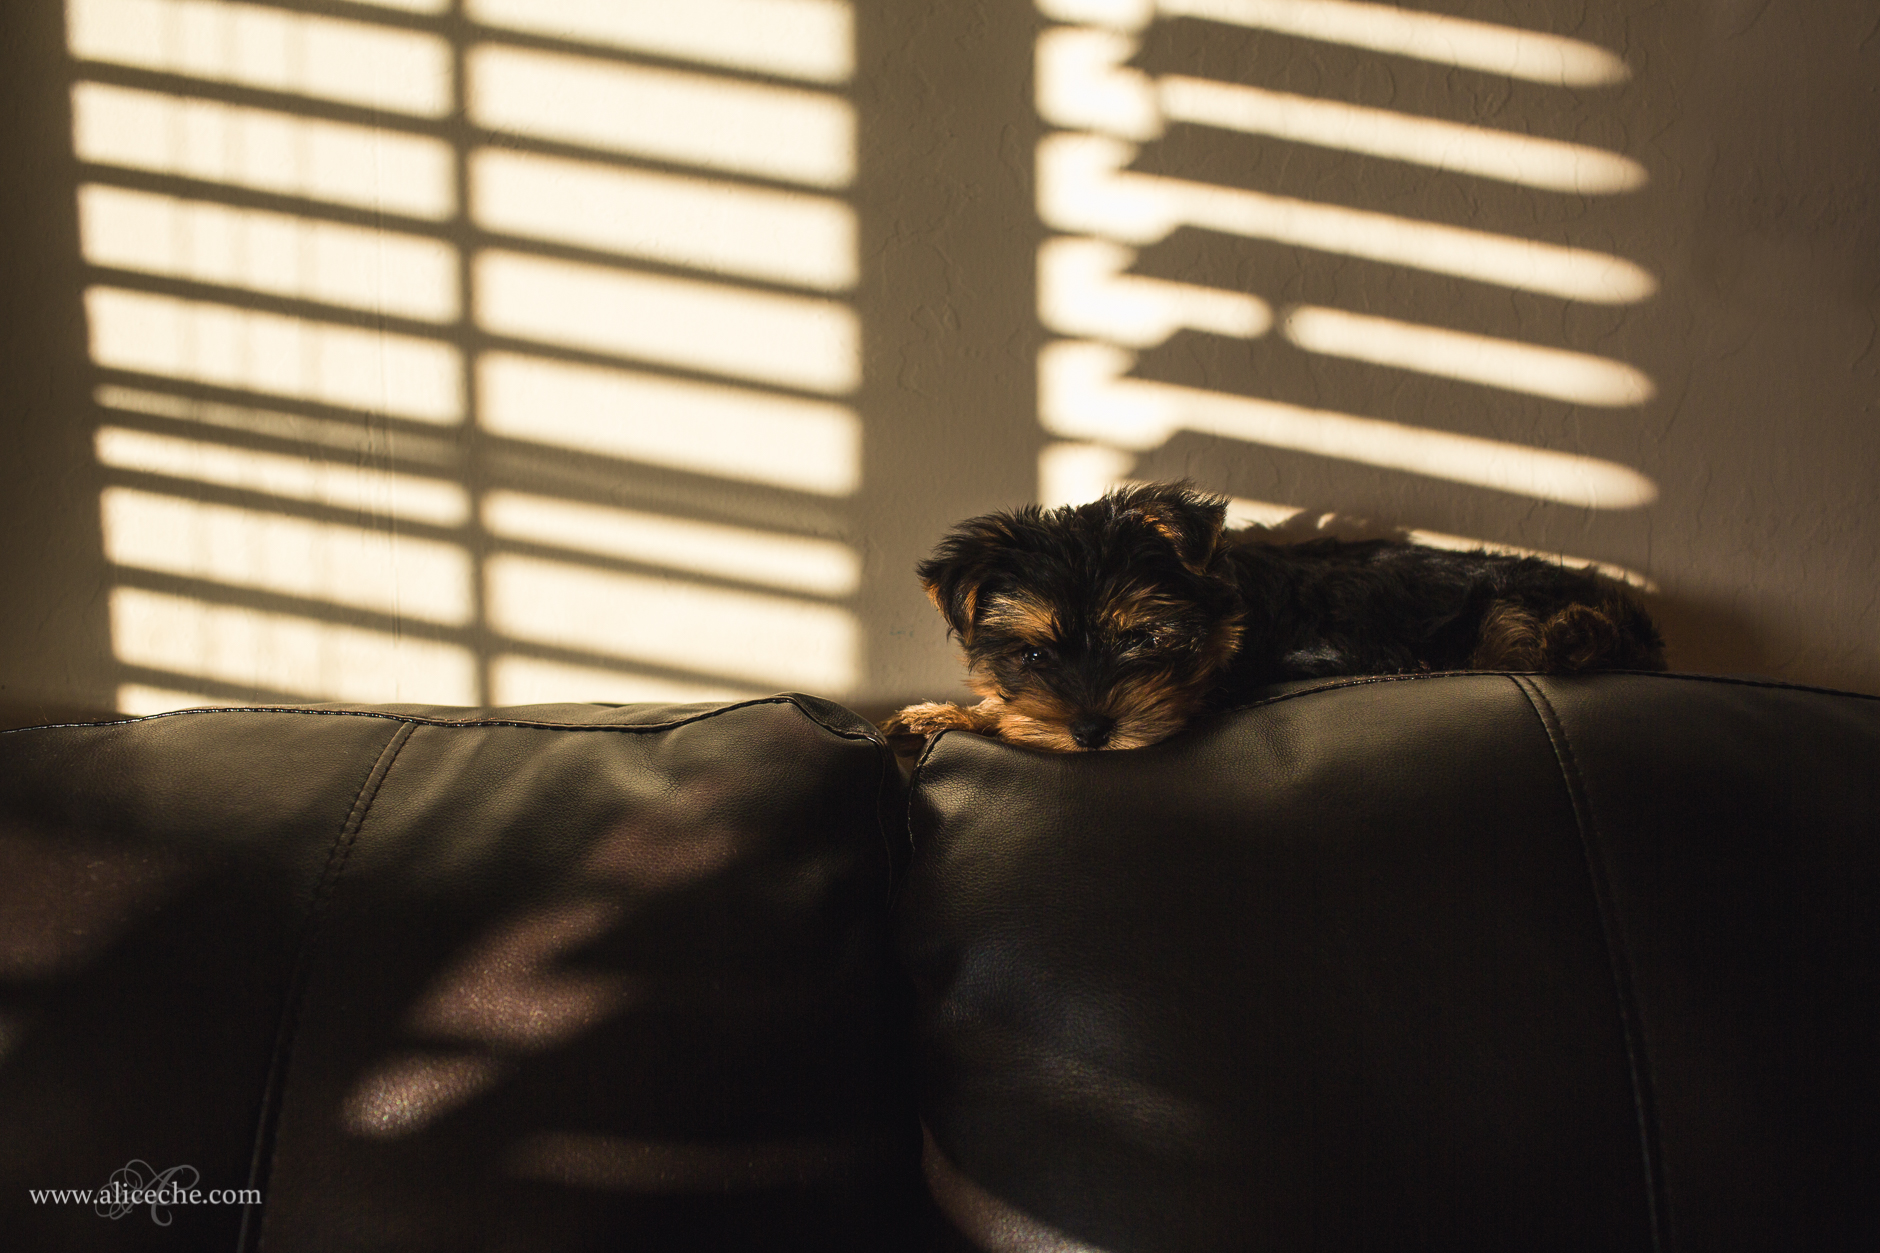 alice-che-photography-yorkshire-terrier-puppy-light-blinds